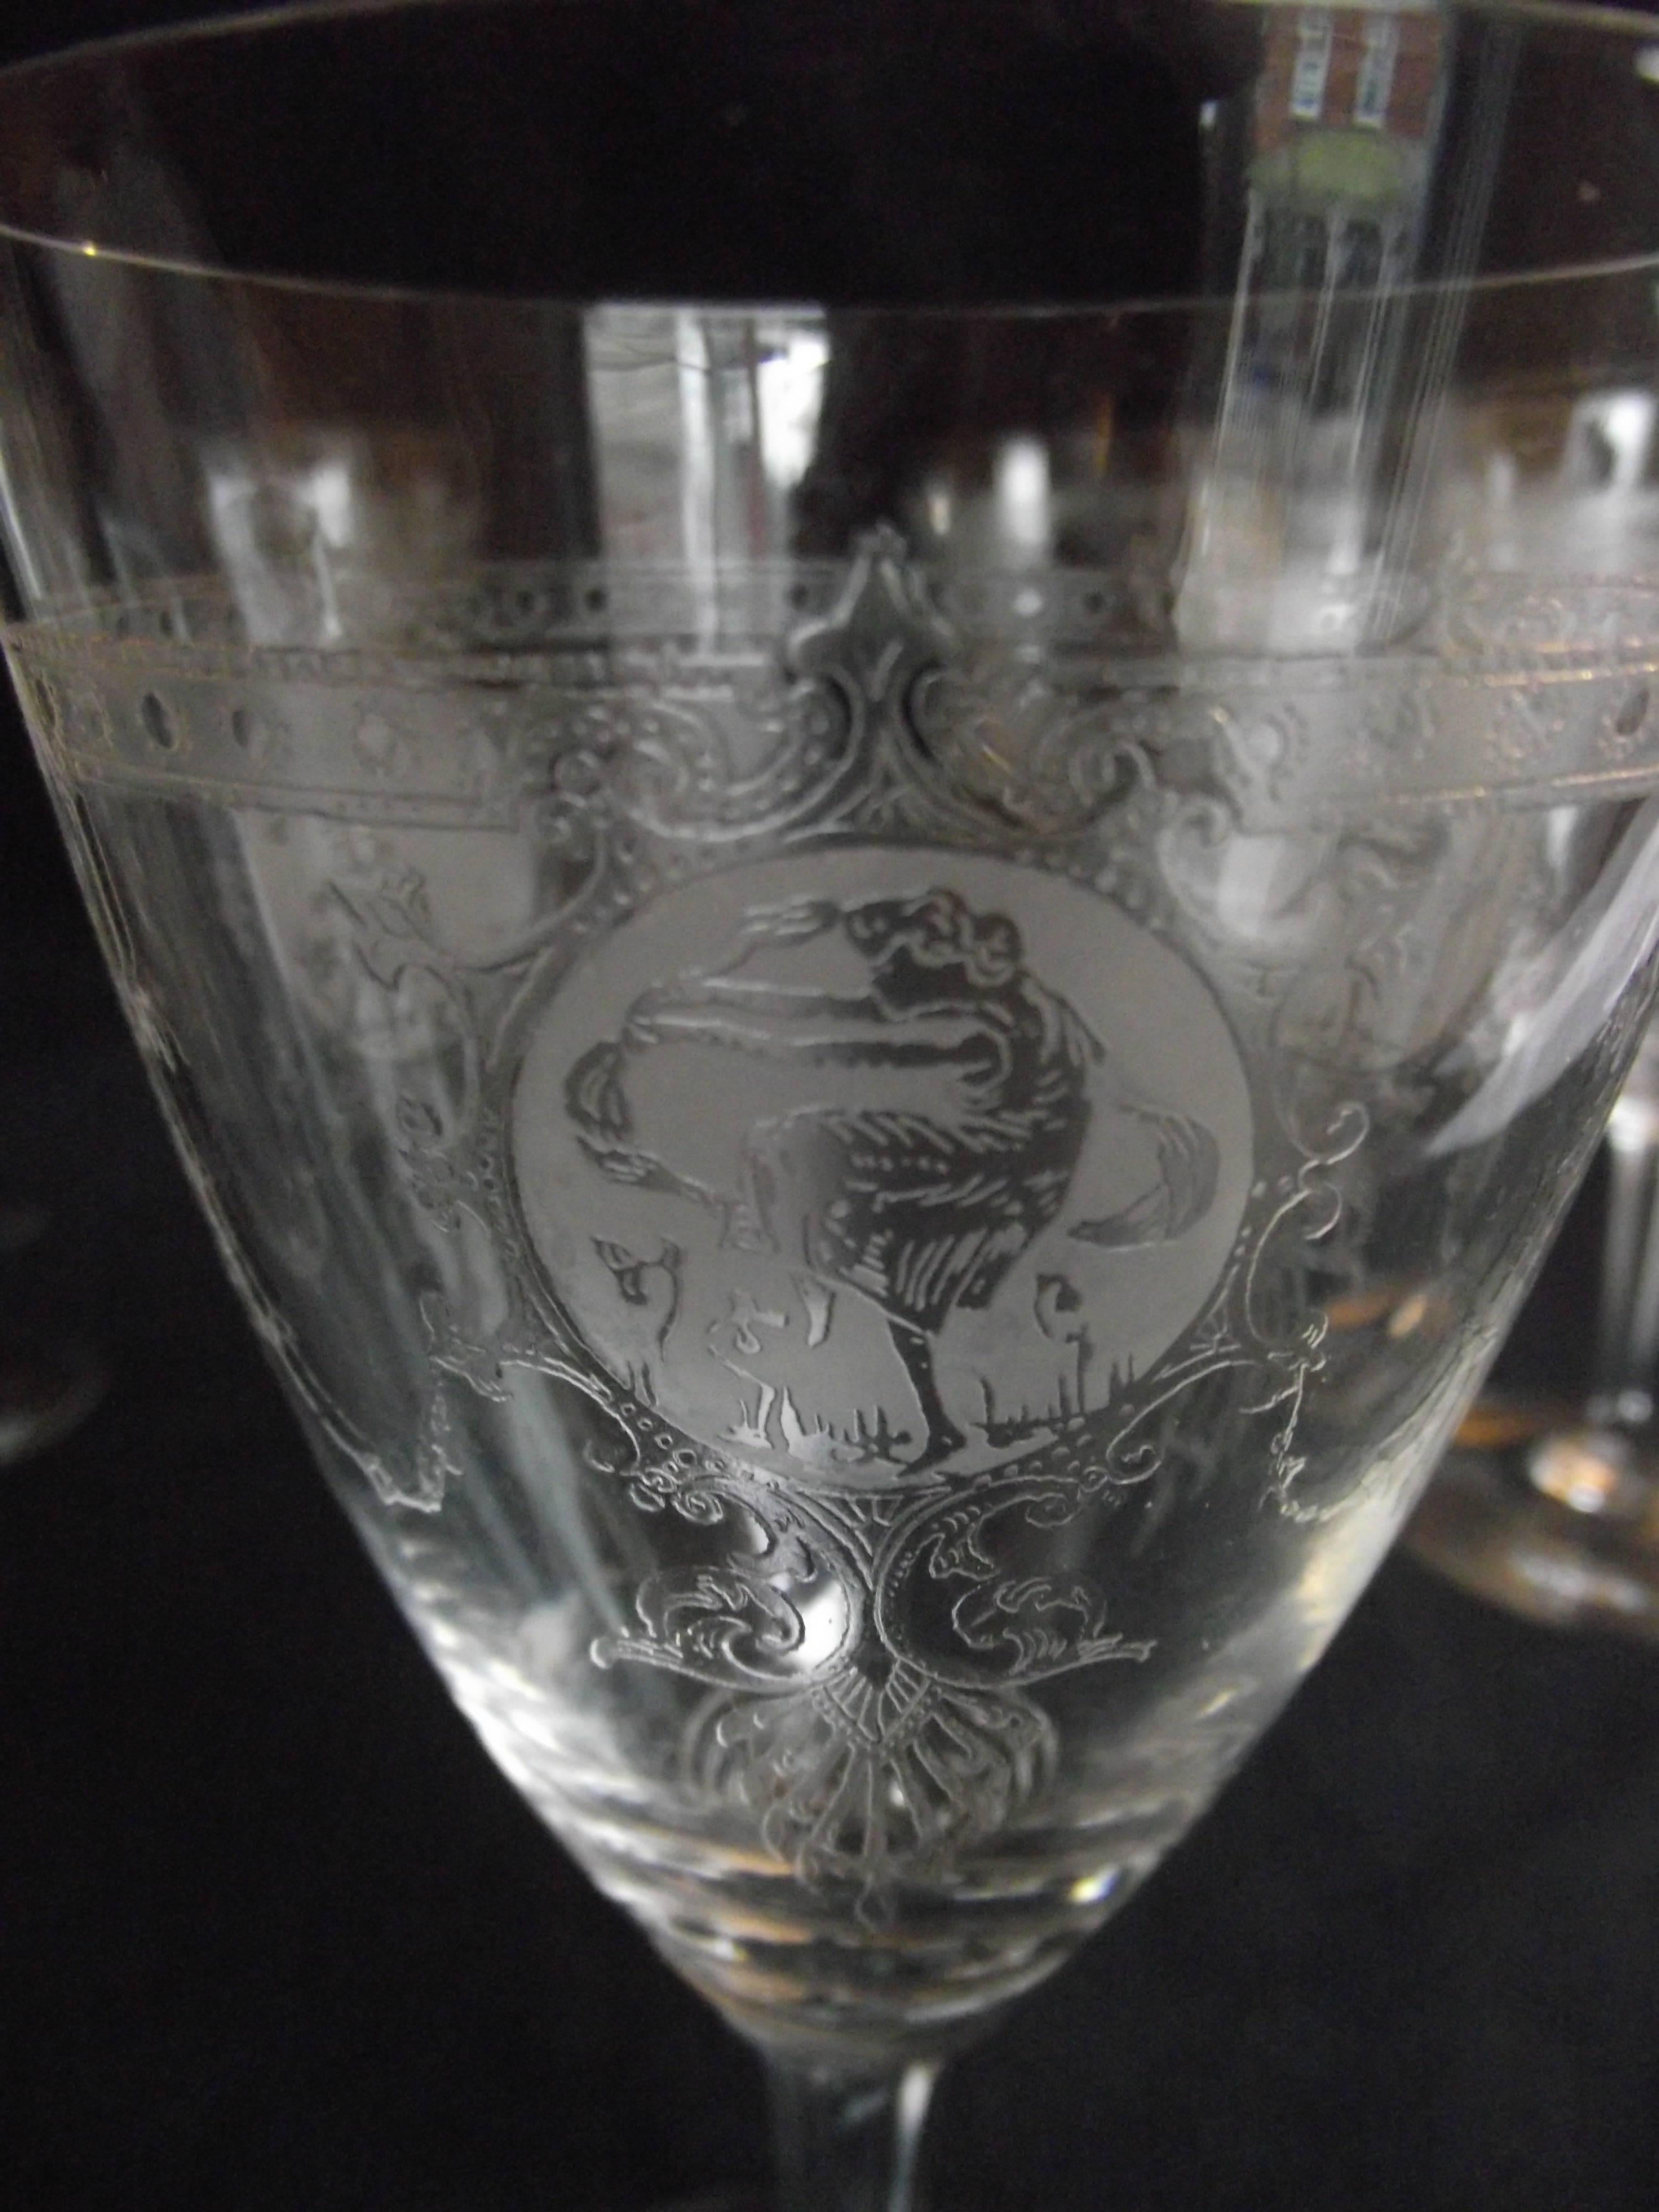 heisey etched glass patterns